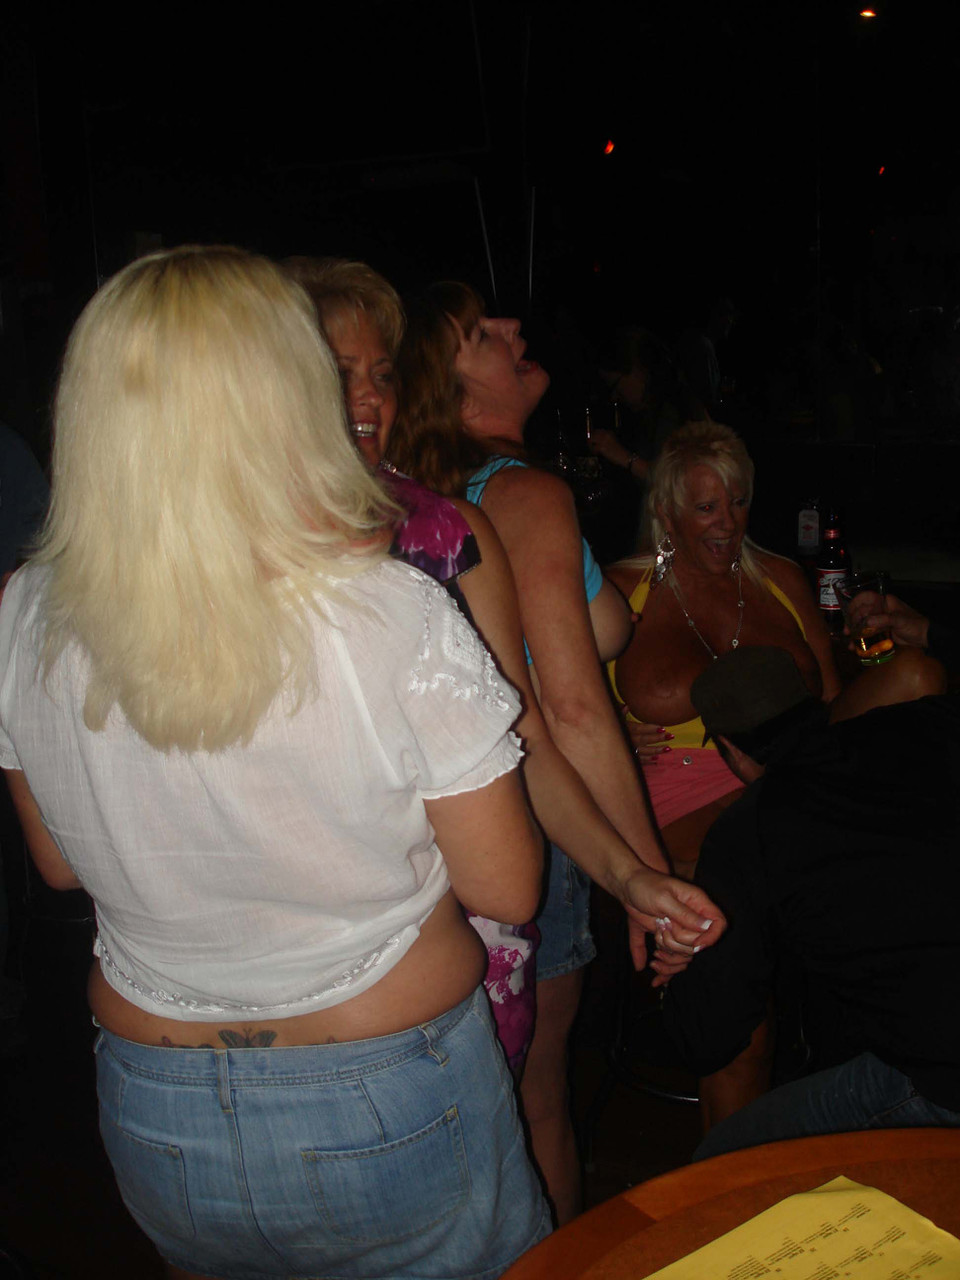 Real Tampa Swingers Dee Delmar, Double Dee, Mandi Mcgraw, Tracy Lick 포르노 사진 #424445794 | Real Tampa Swingers Pics, Dee Delmar, Double Dee, Mandi Mcgraw, Tracy Lick, Party, 모바일 포르노